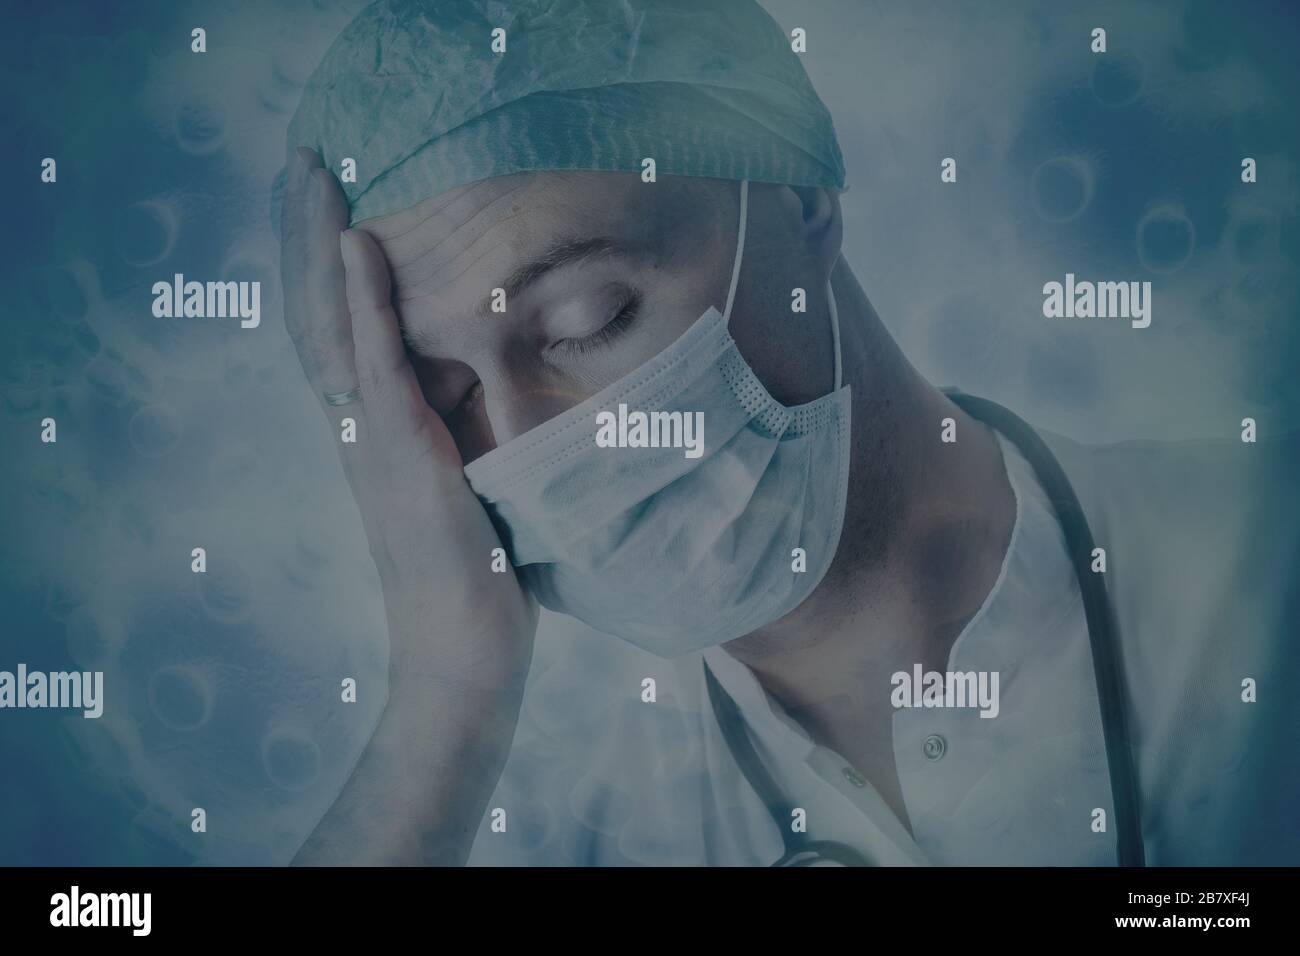 Coronavirus Ilustration, young doctor in cap and mask having an headache, COVID 19 Stock Photo